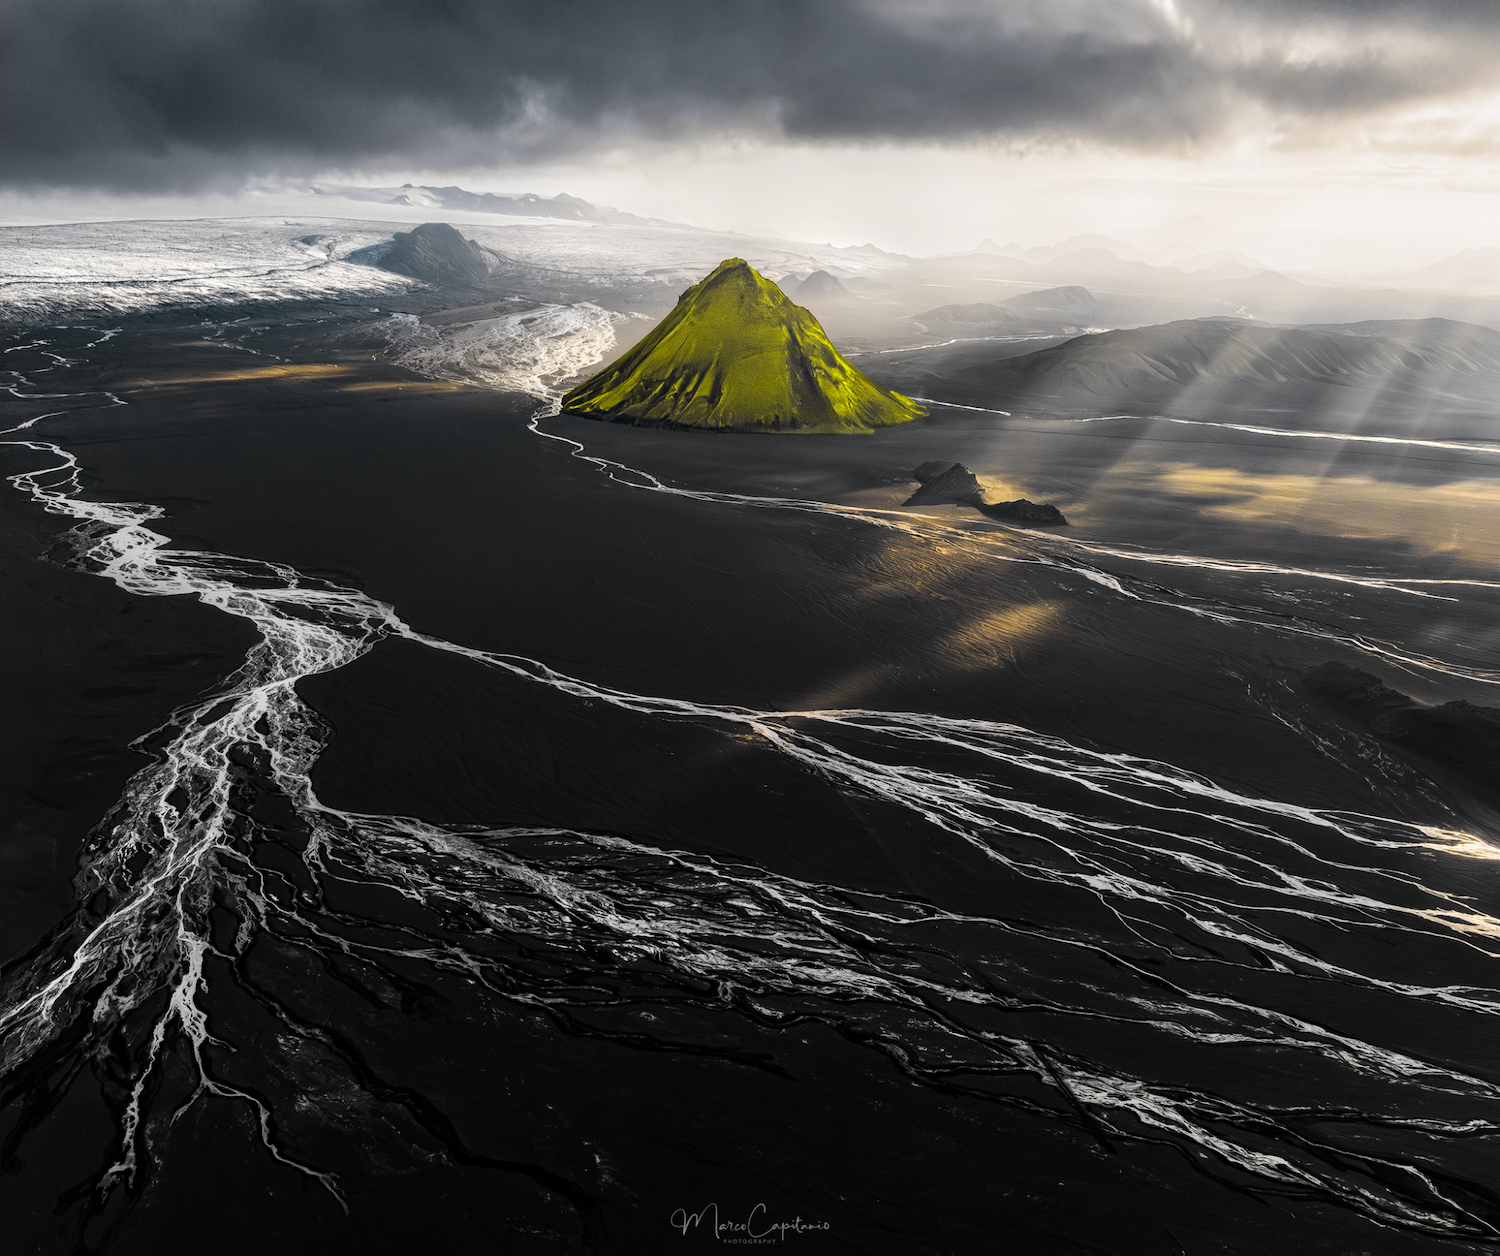 a green mountain stands by itself on black sand